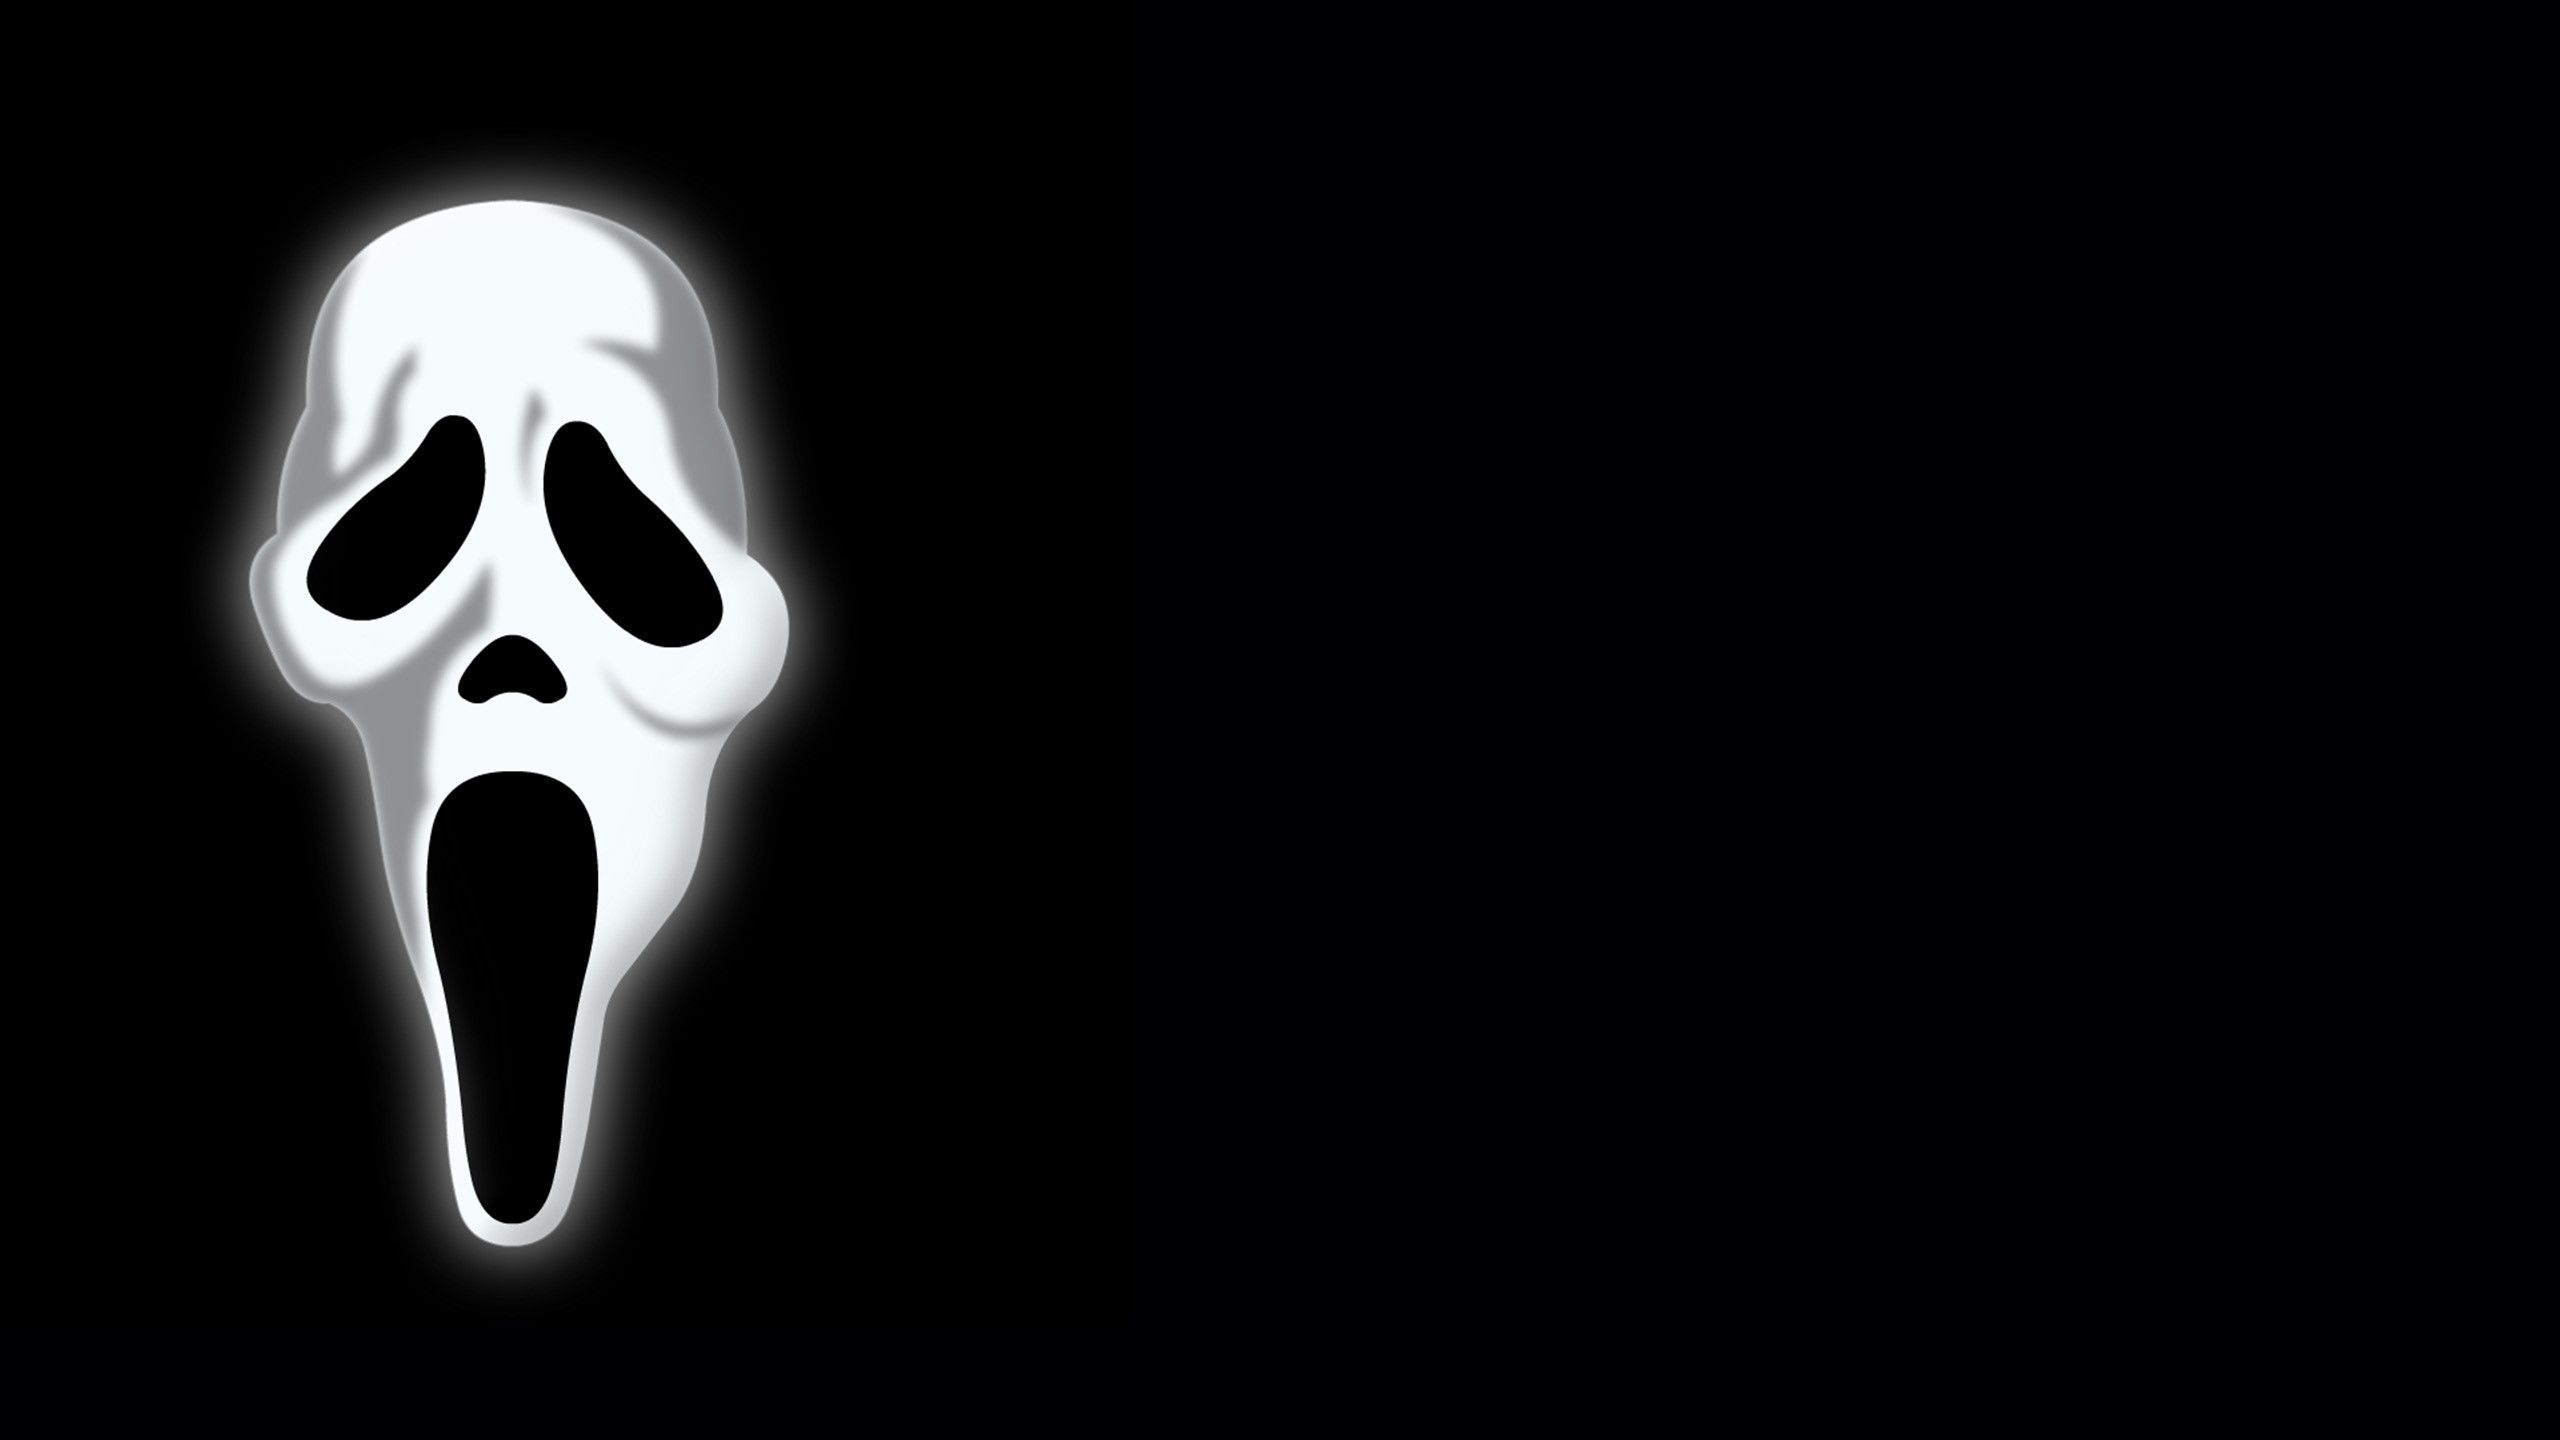 Ghostface Wallpapers